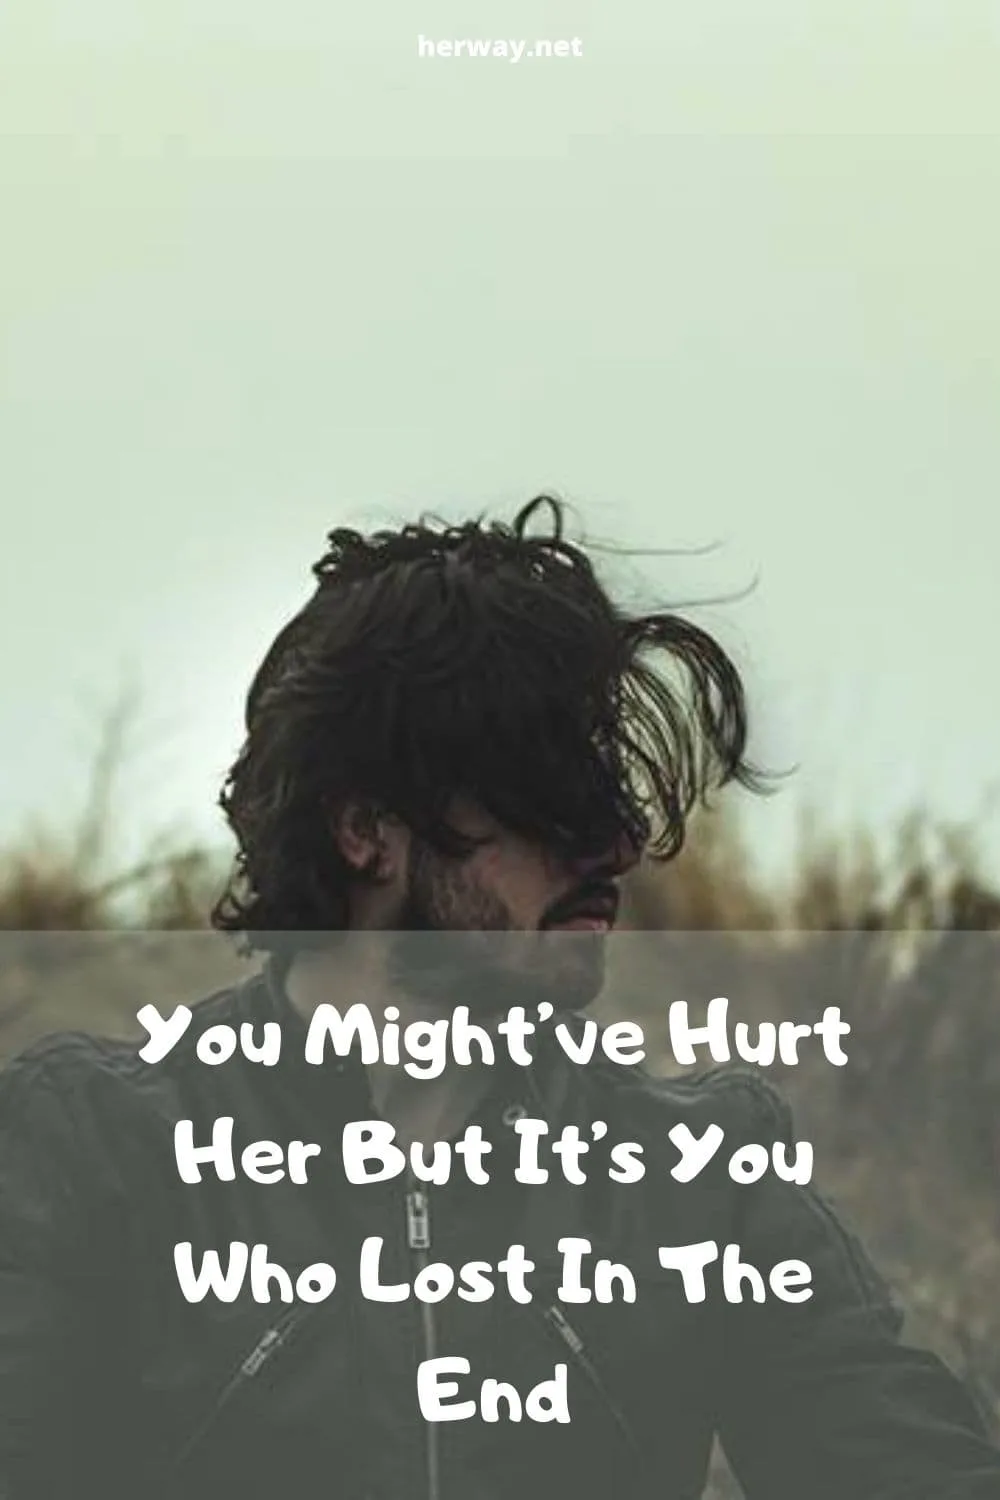 You Might’ve Hurt Her But It’s You Who Lost In The End